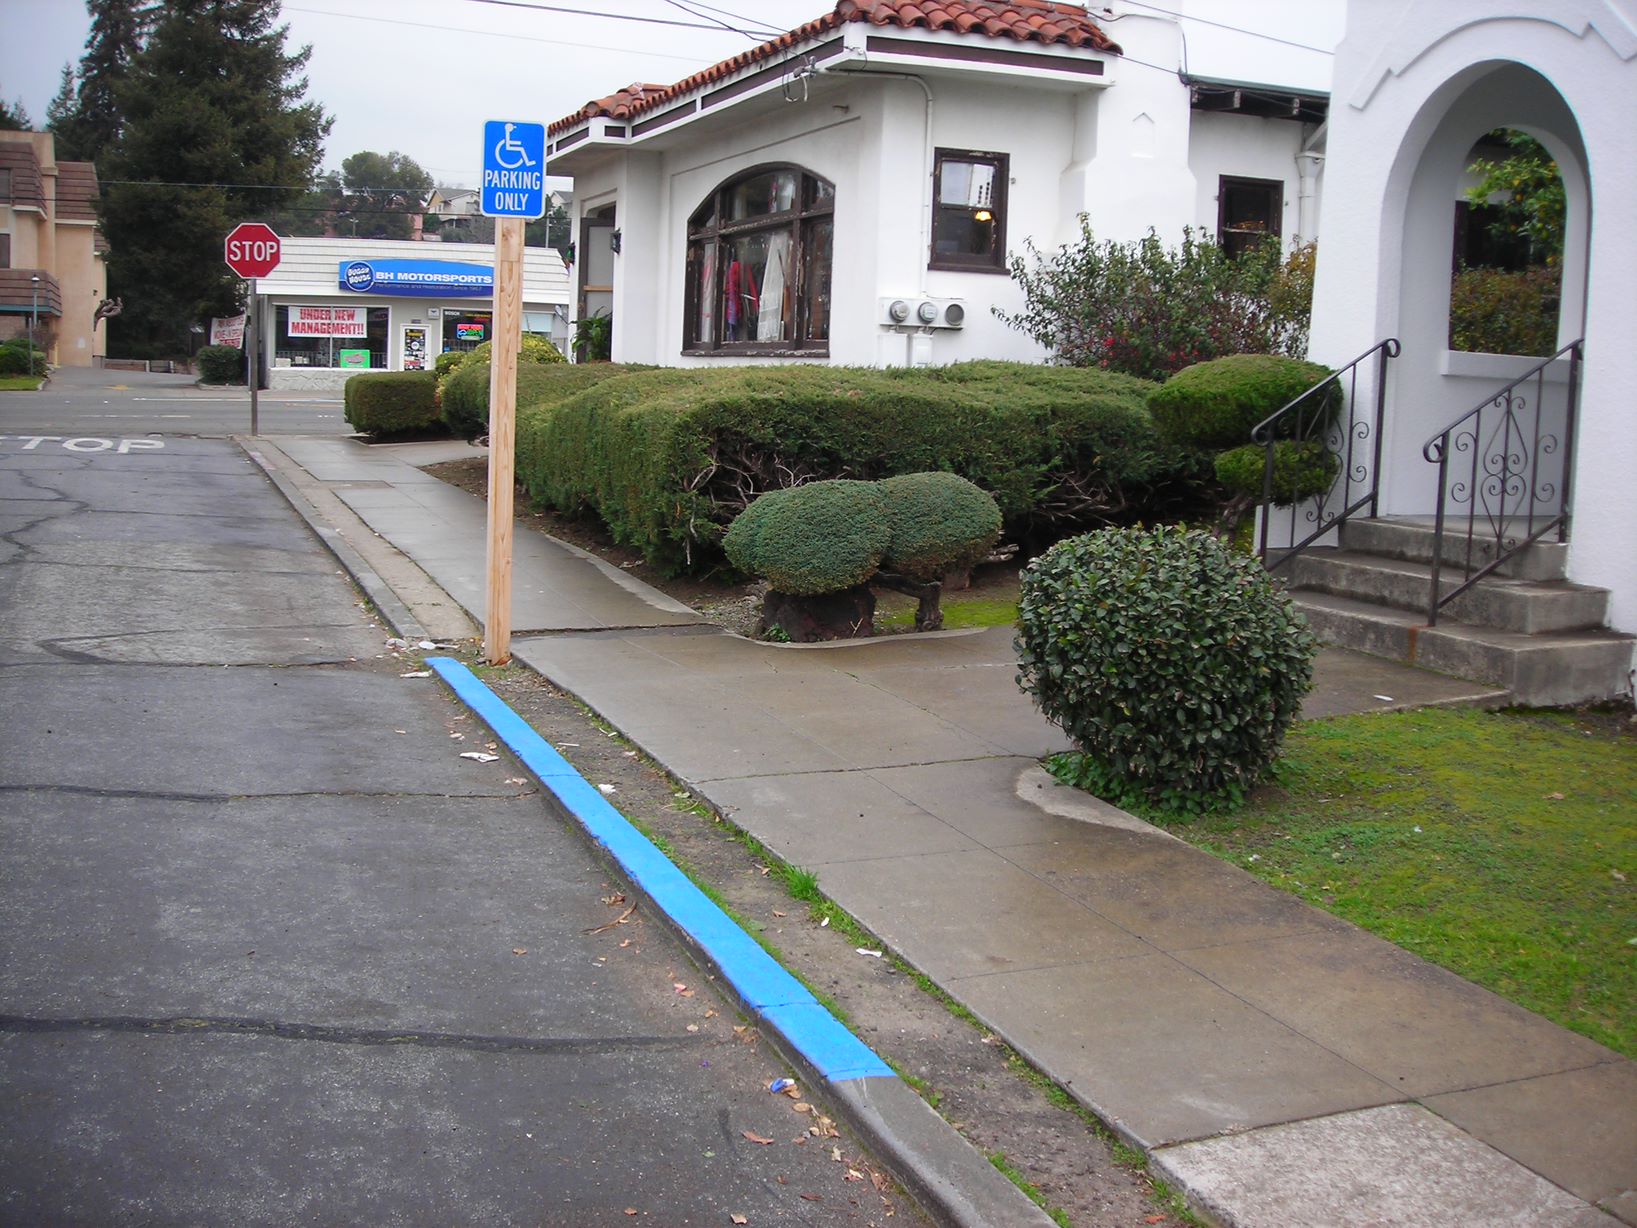 A photo of a residence with blue disabled parking zone and a disabled parking sign 